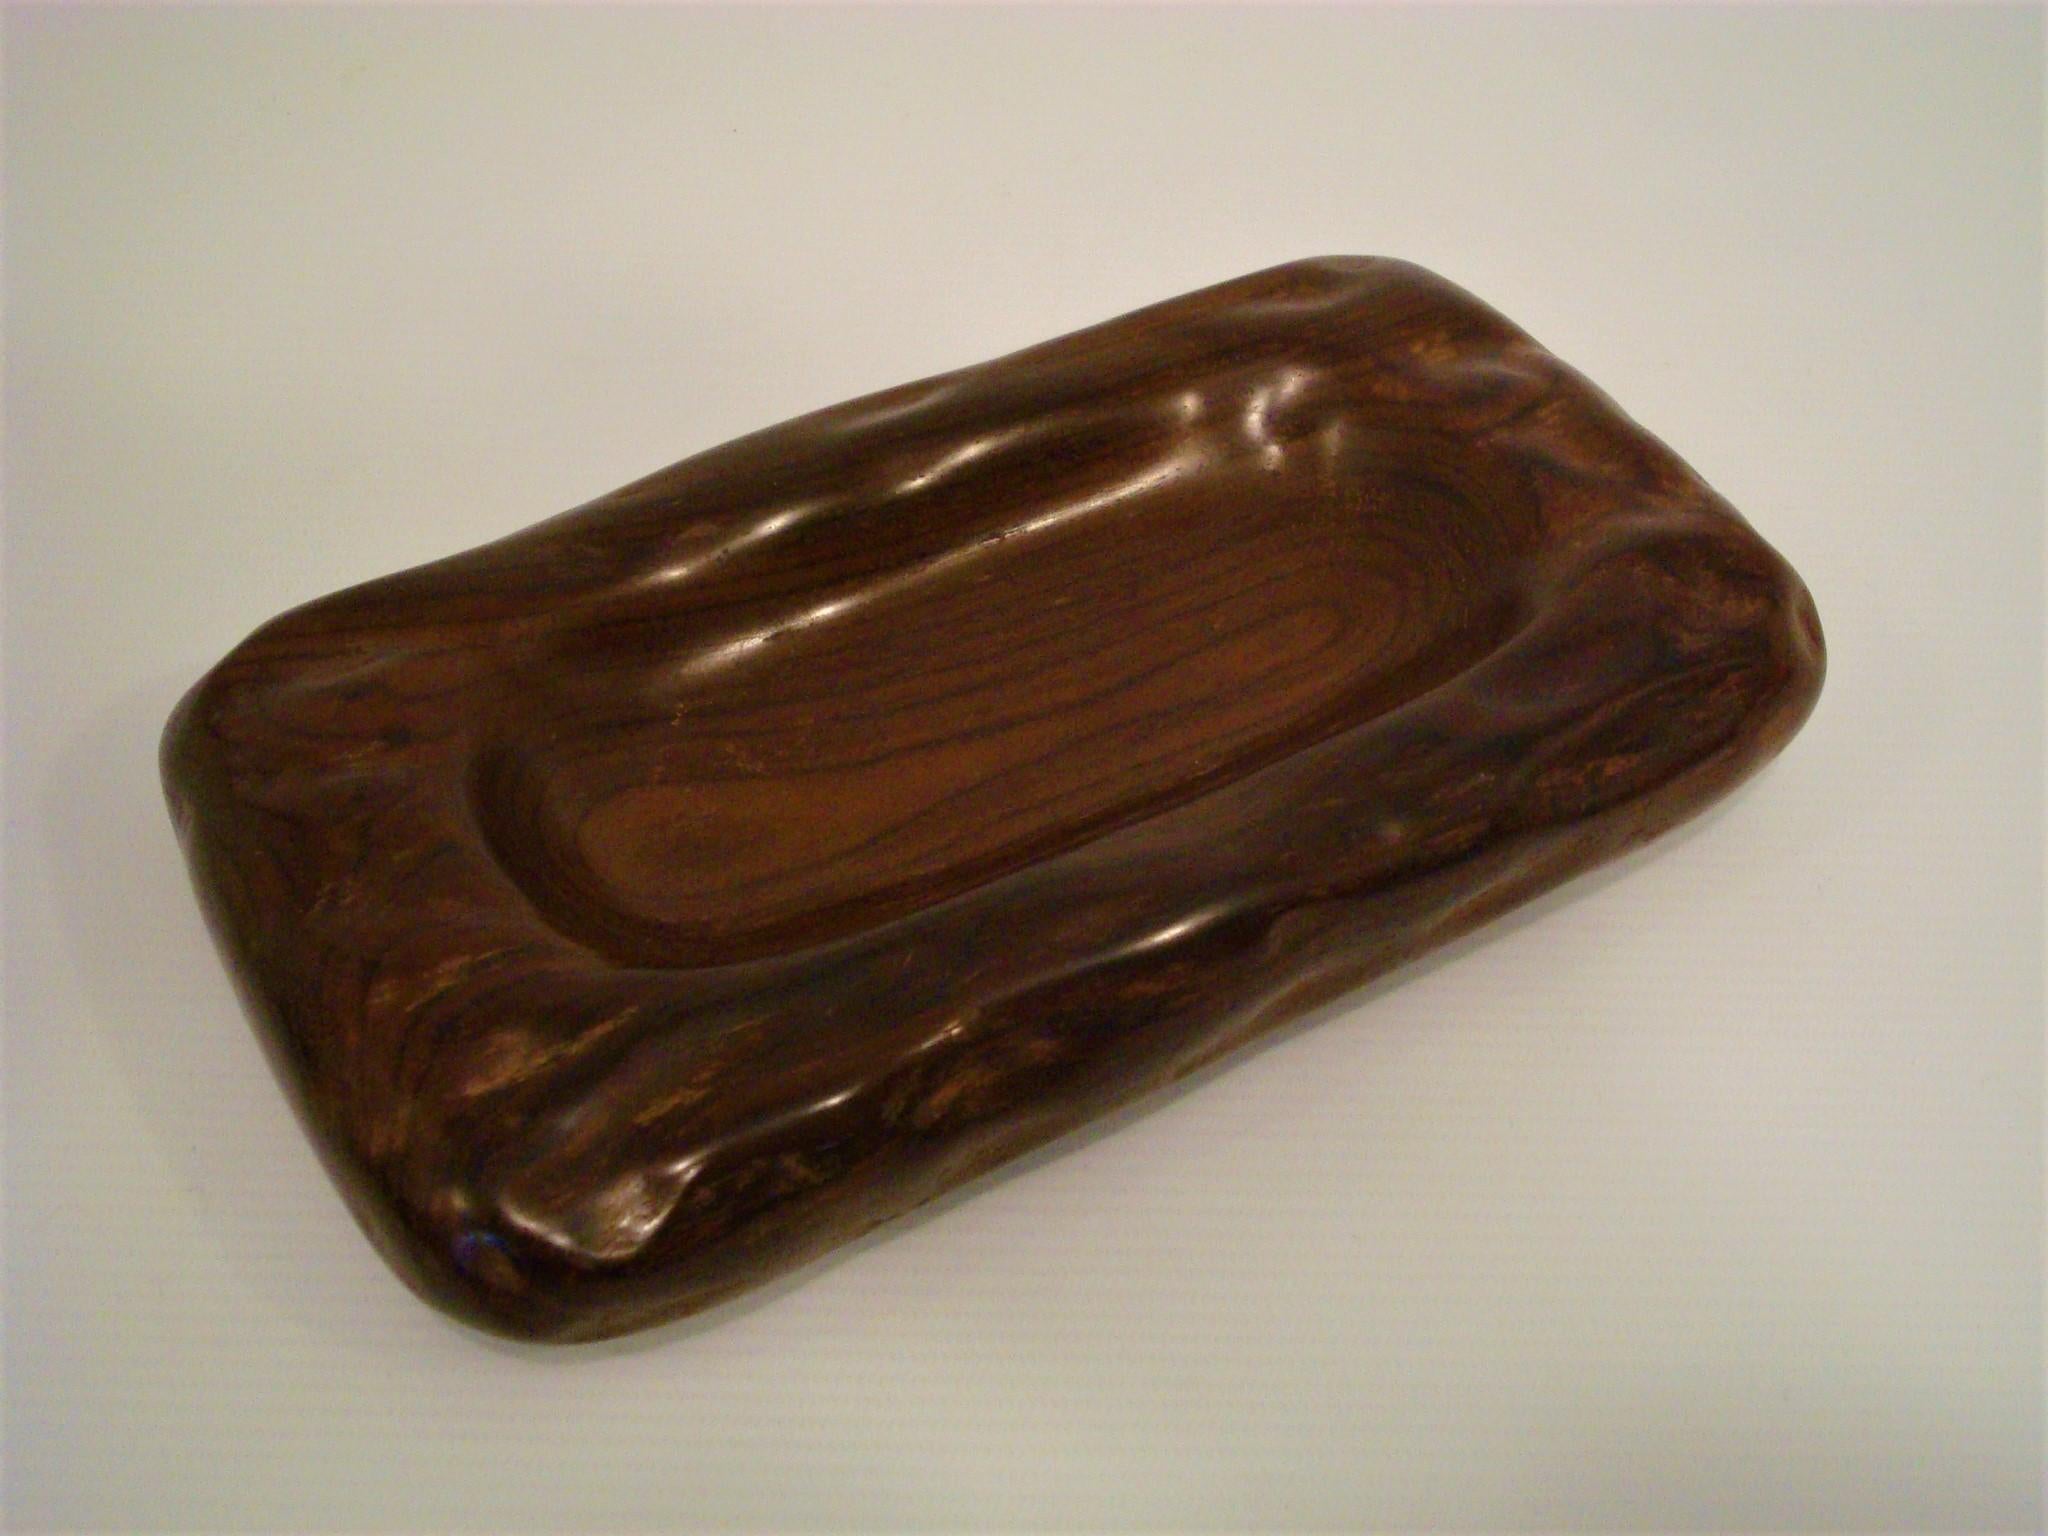 Lovely Alexandre Noll cigar ashtray / bowl / Dish. Carved in exotic wood.
Alexandre Noll hand carved Cigar Ashtray.
Mid-century. 
France, c. 1950
Hand carved signature to underside 'ANoll'.
Example shows minor surface wear to underside